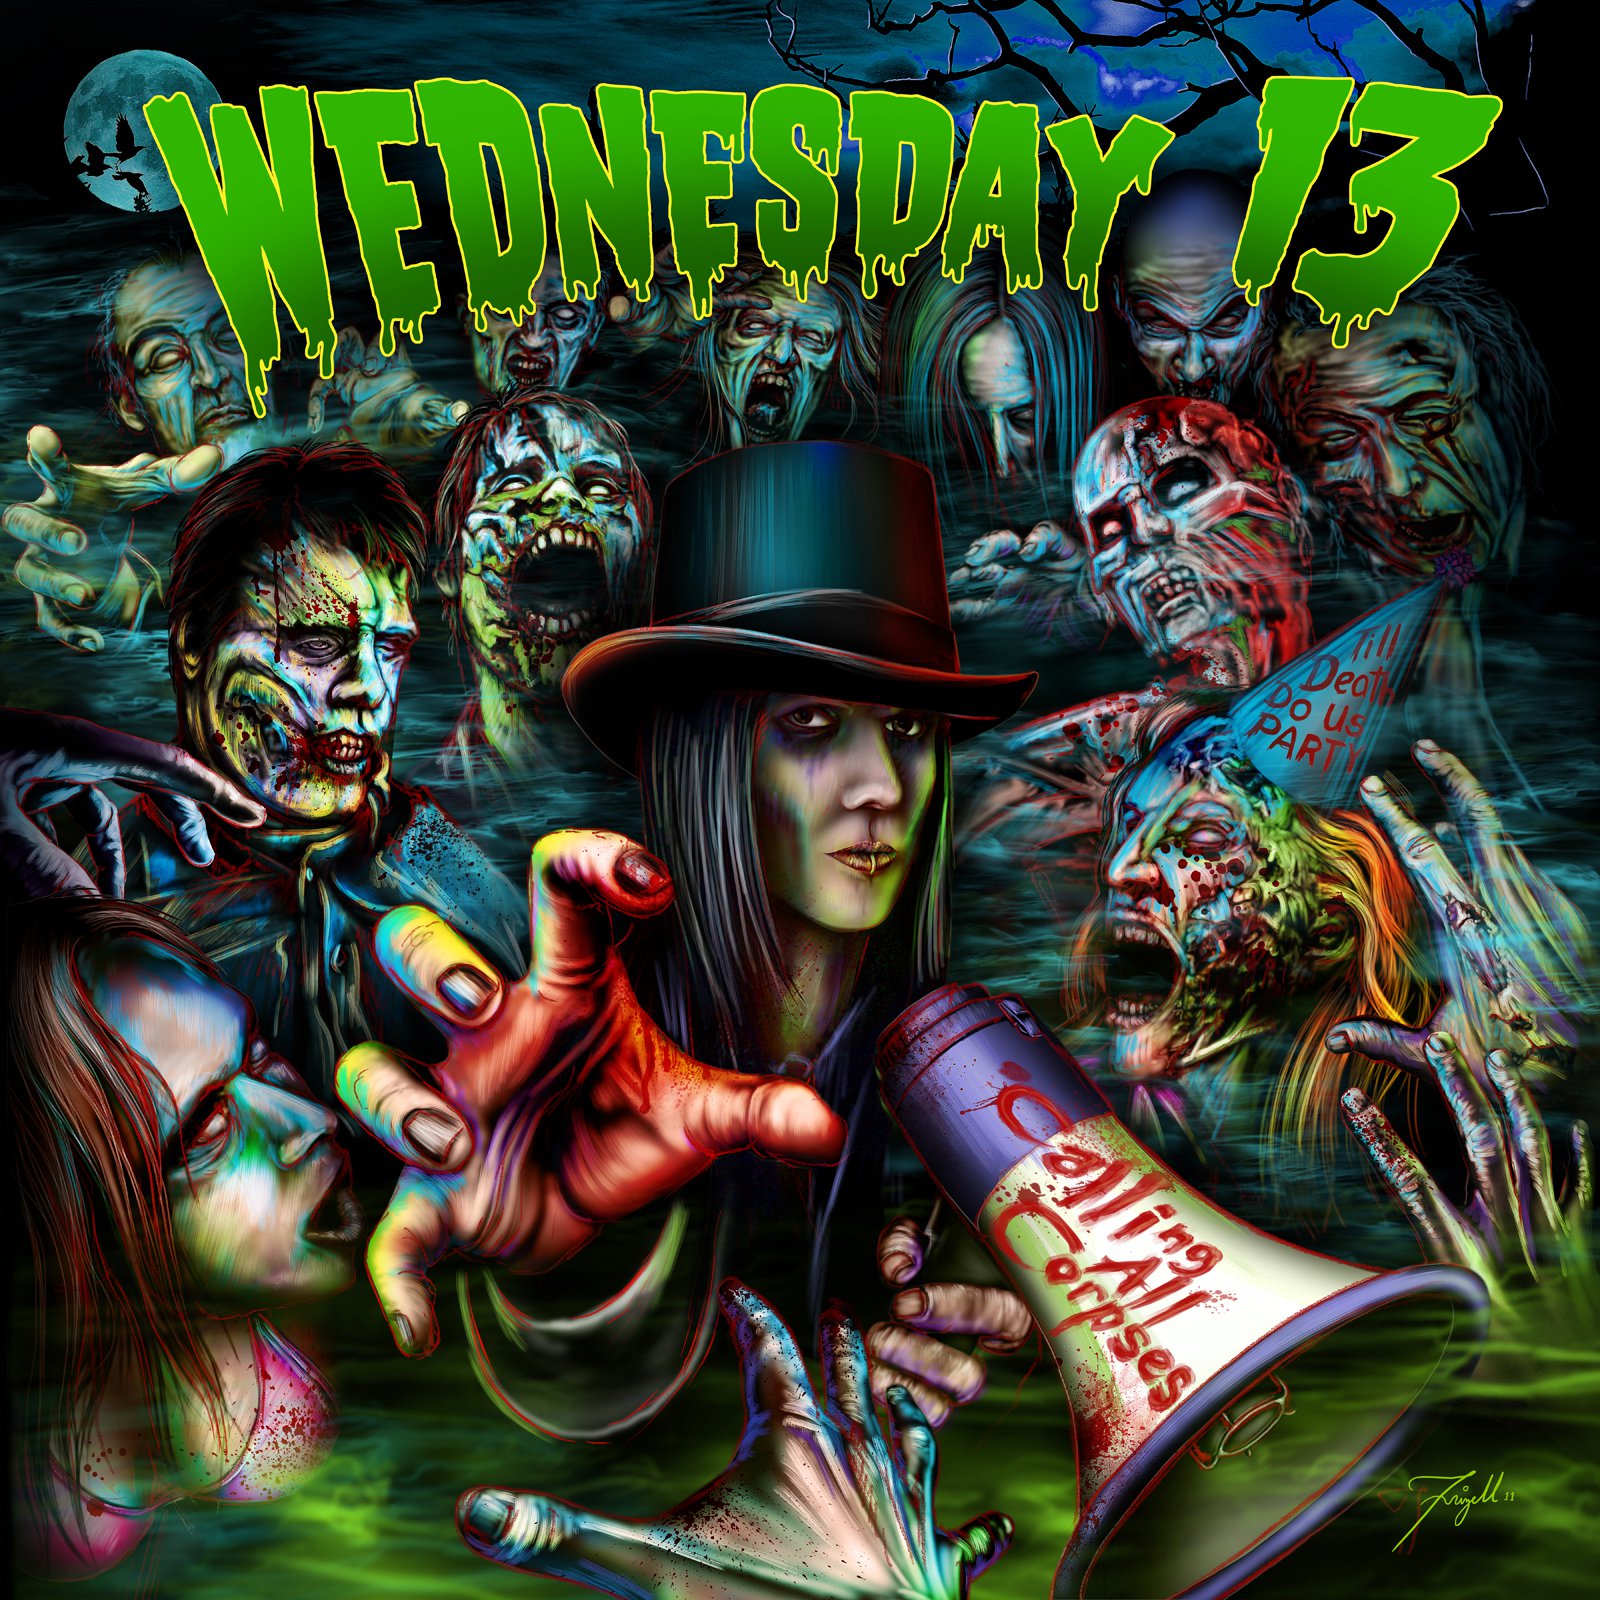 Wednesday 13 – Calling All Corpses